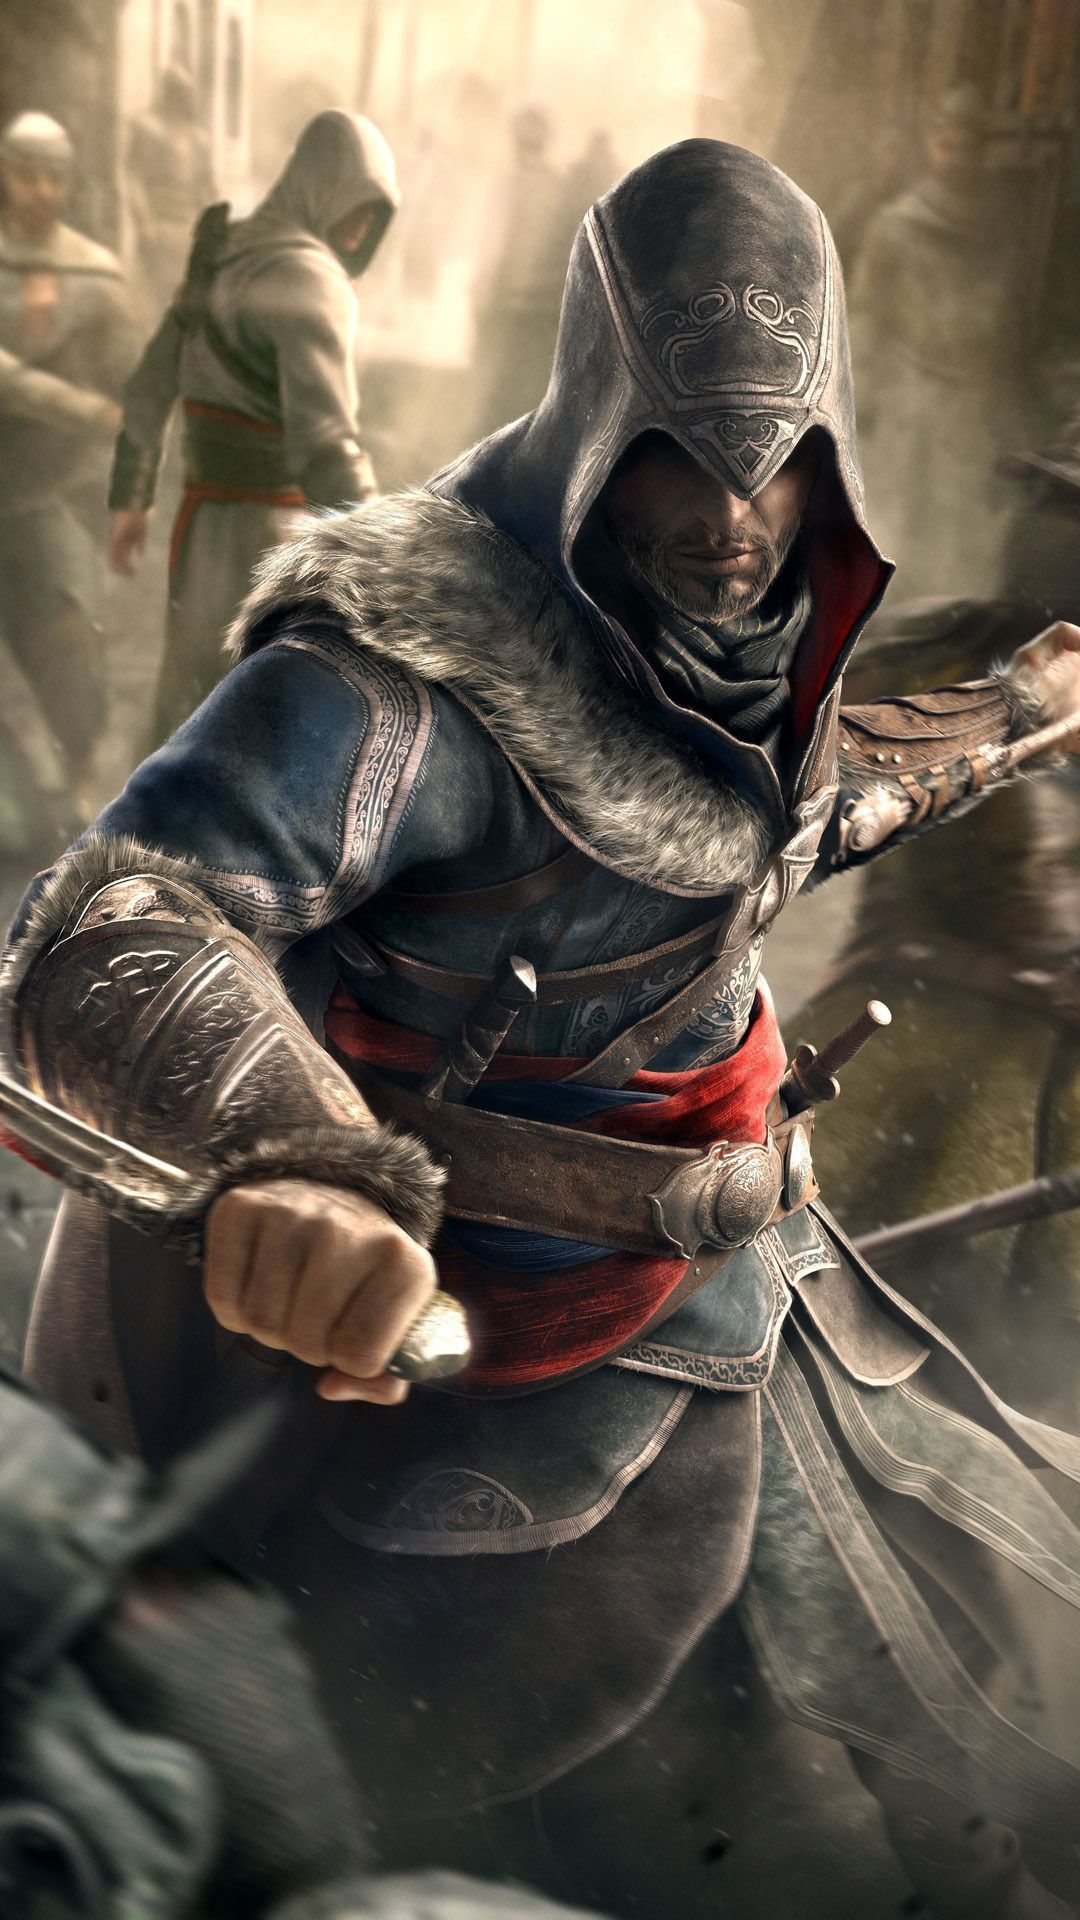 Download Free Assassin S Creed Background For Iphone - Assassin's Creed Wallpaper Phone - HD Wallpaper 